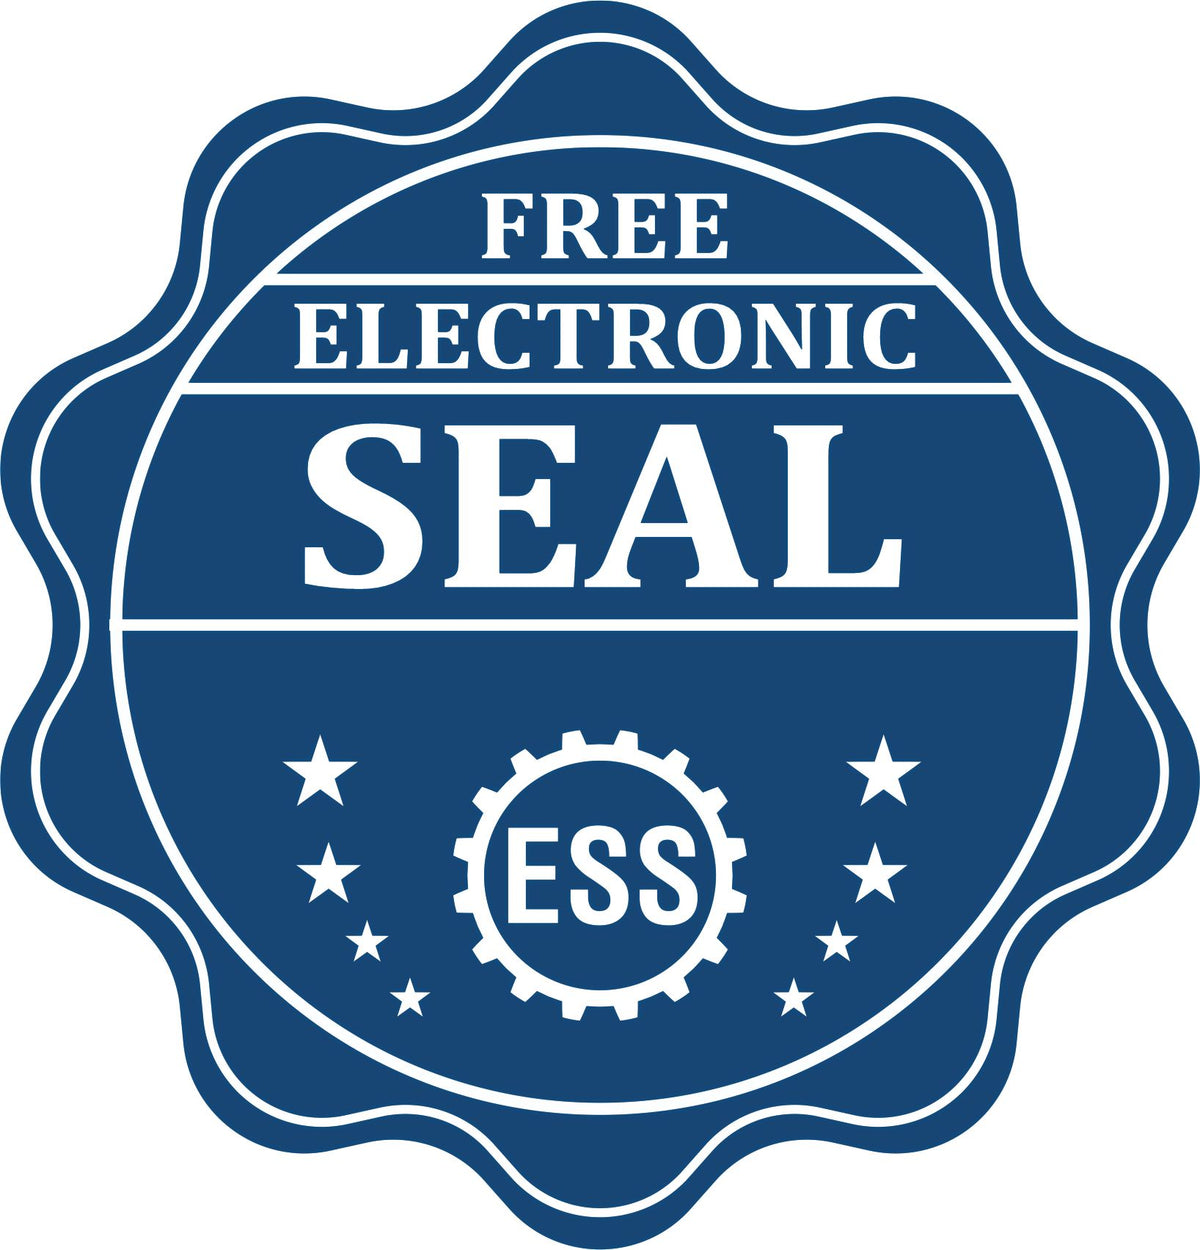 A badge showing a free electronic seal for the Heavy Duty Cast Iron Washington Engineer Seal Embosser with stars and the ESS gear on the emblem.